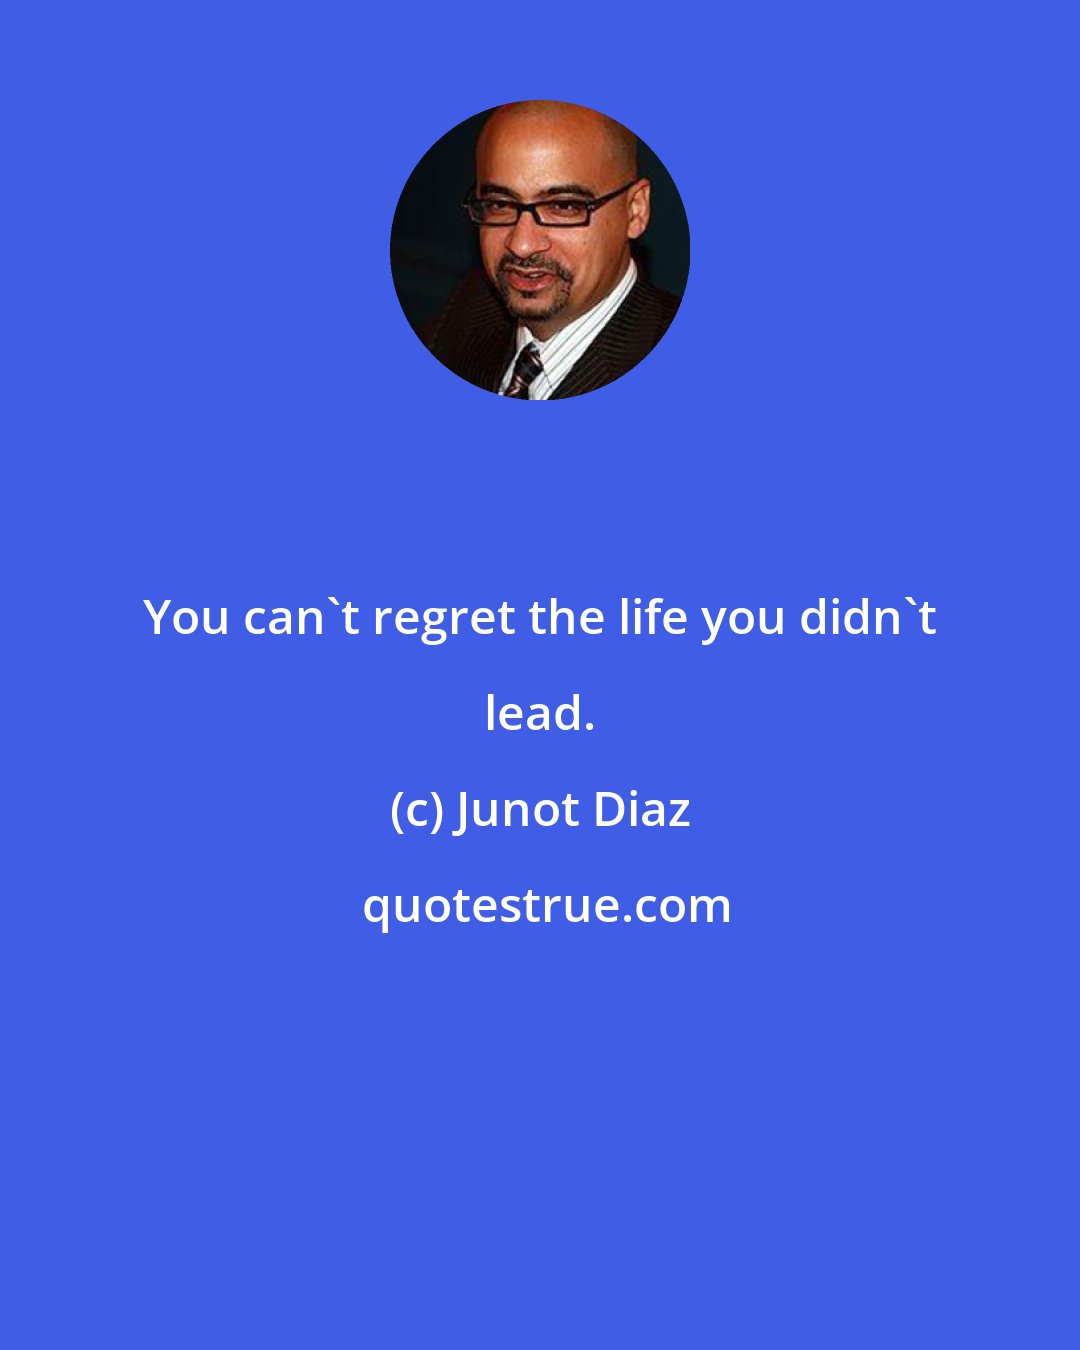 Junot Diaz: You can't regret the life you didn't lead.